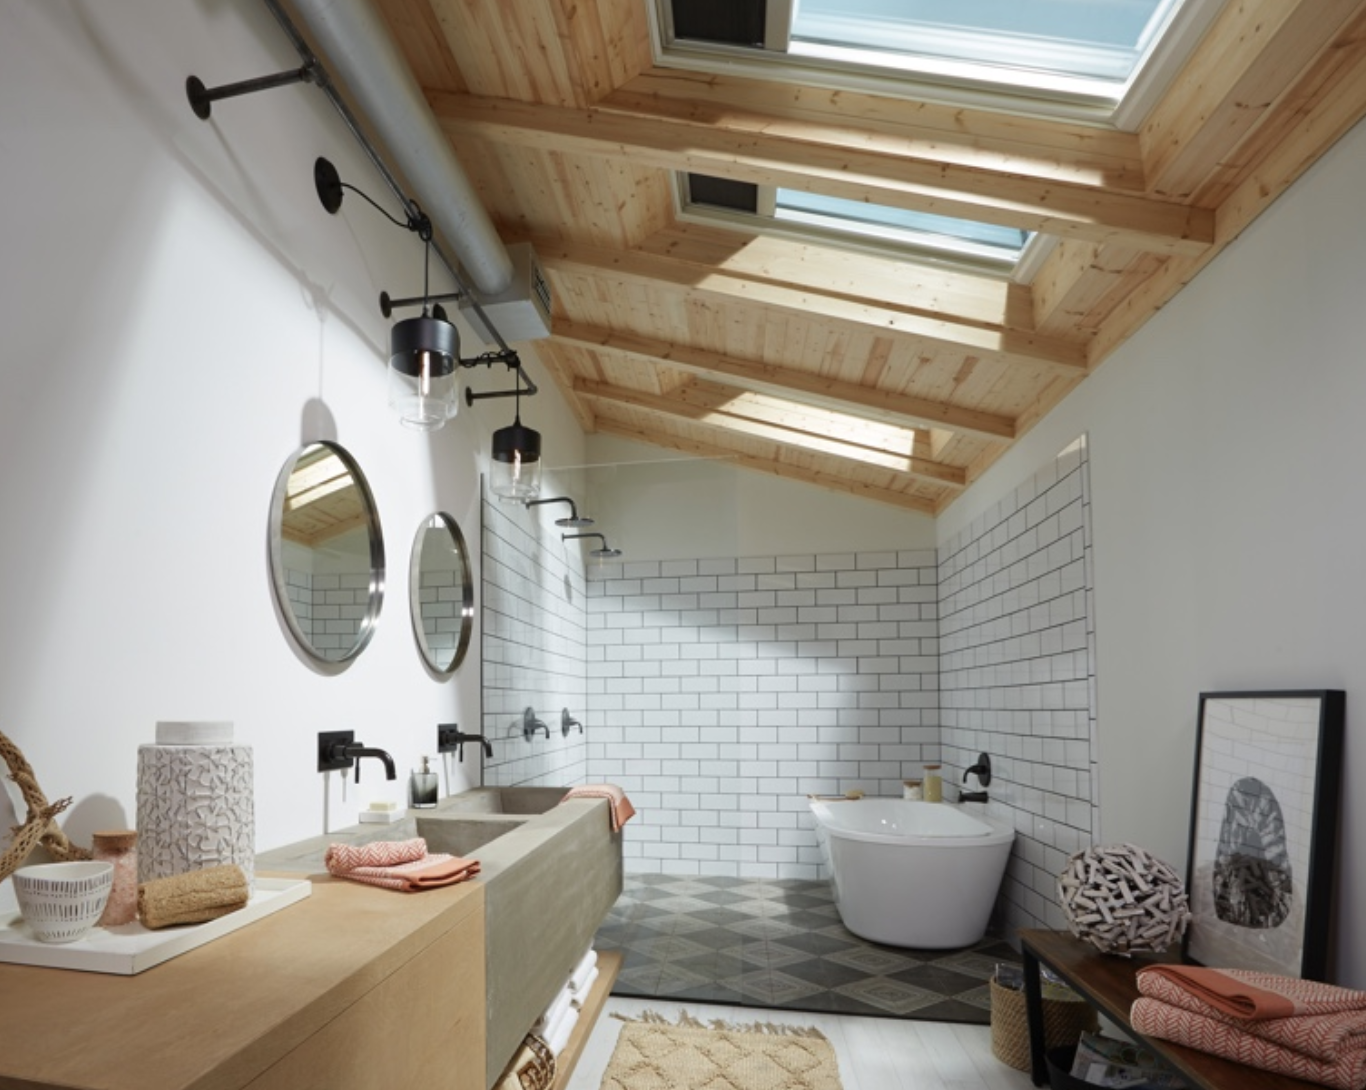 VELUX Fresh air skylights by Specialty Home Products. Specialty Home Products, Inc. Spokane (509)534-8372